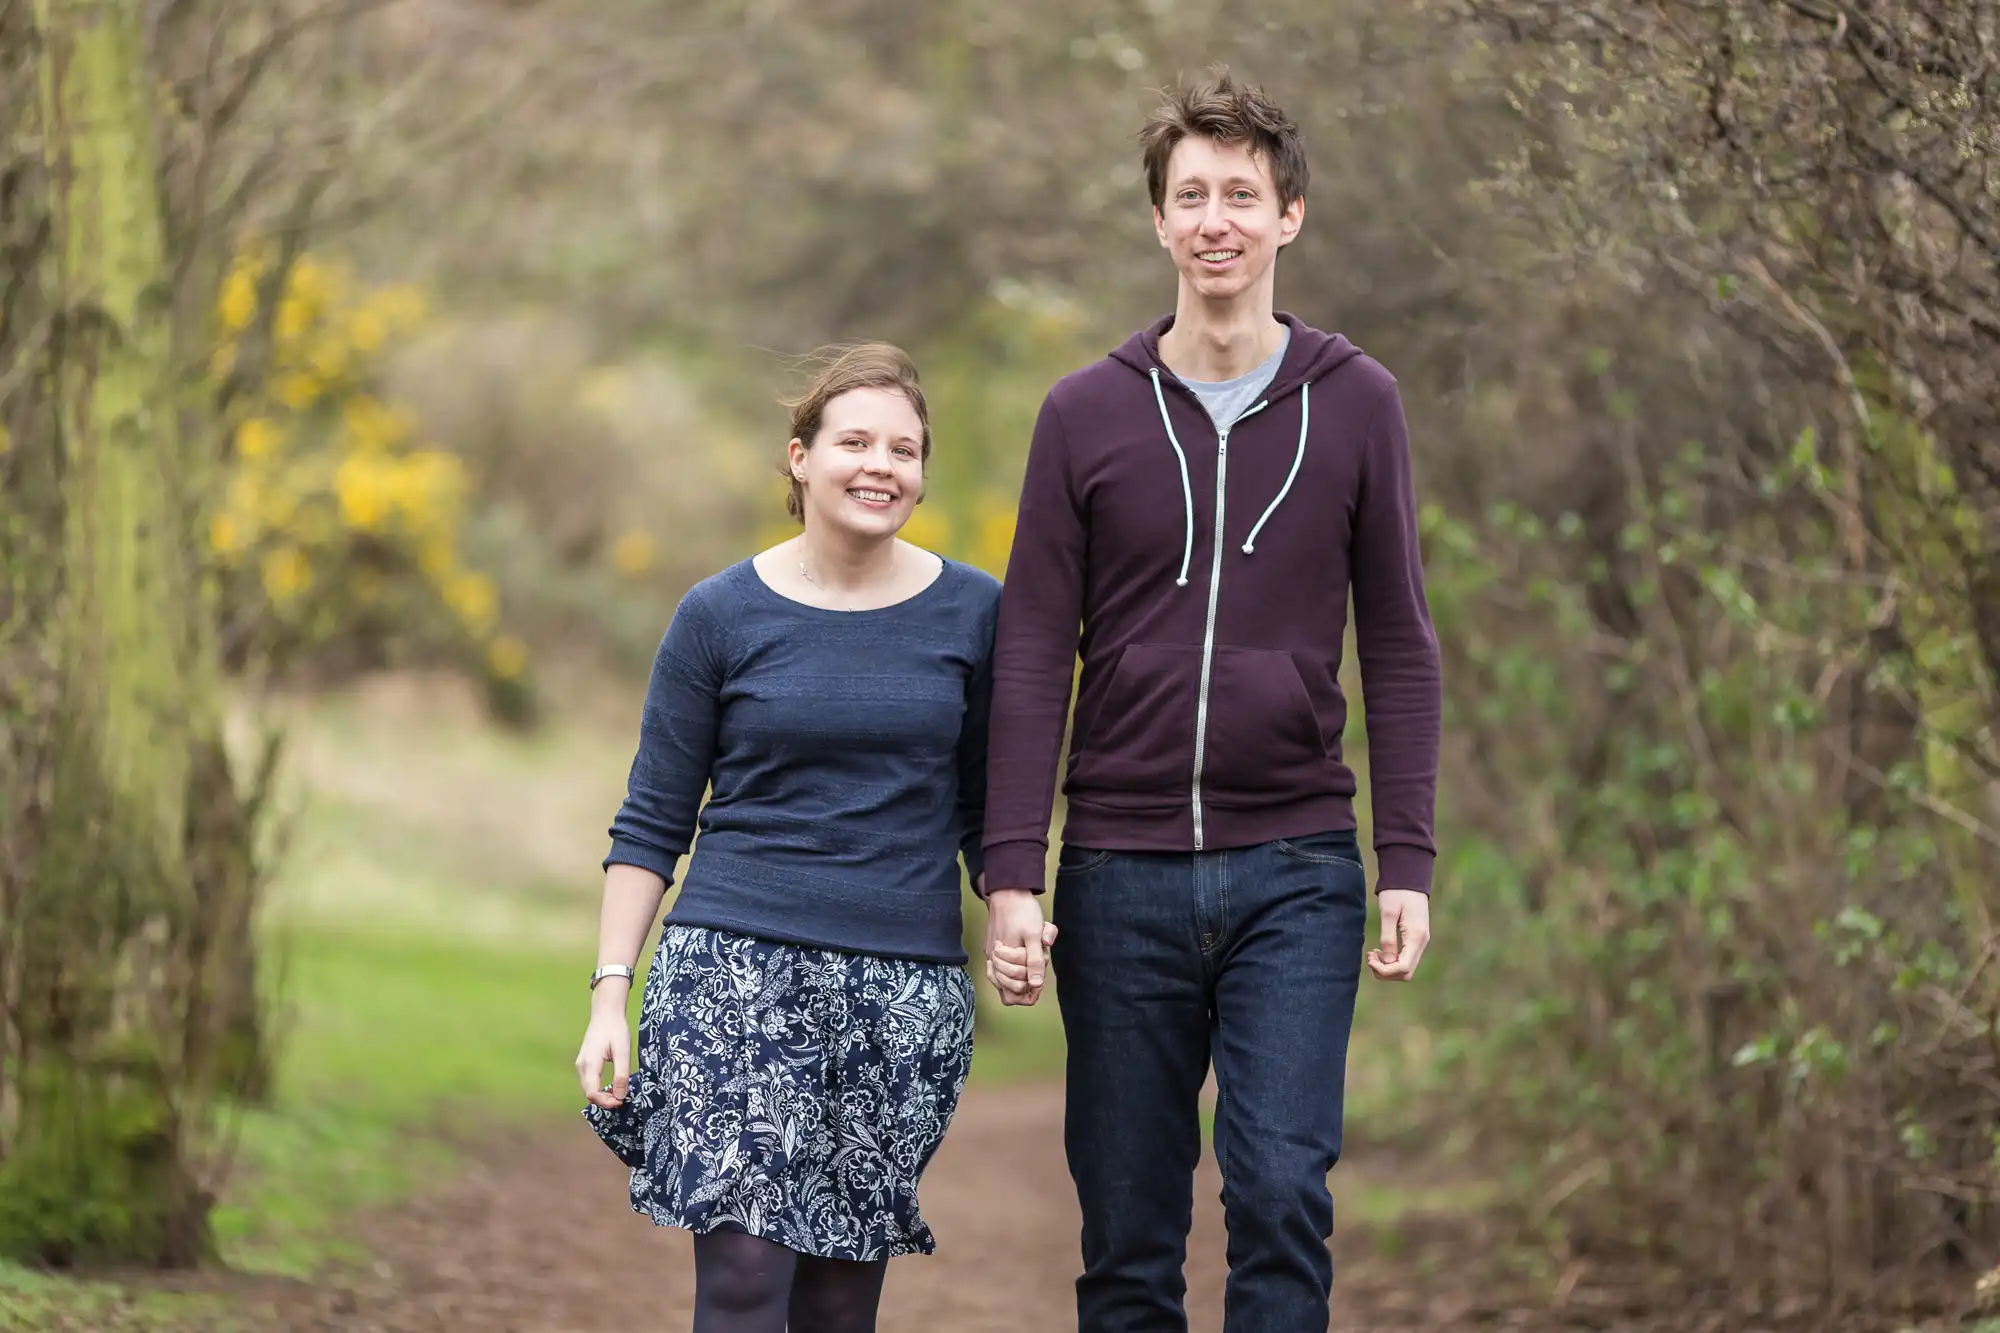 A young couple holding hands and smiling while walking on a forest path, surrounded by trees and undergrowth.